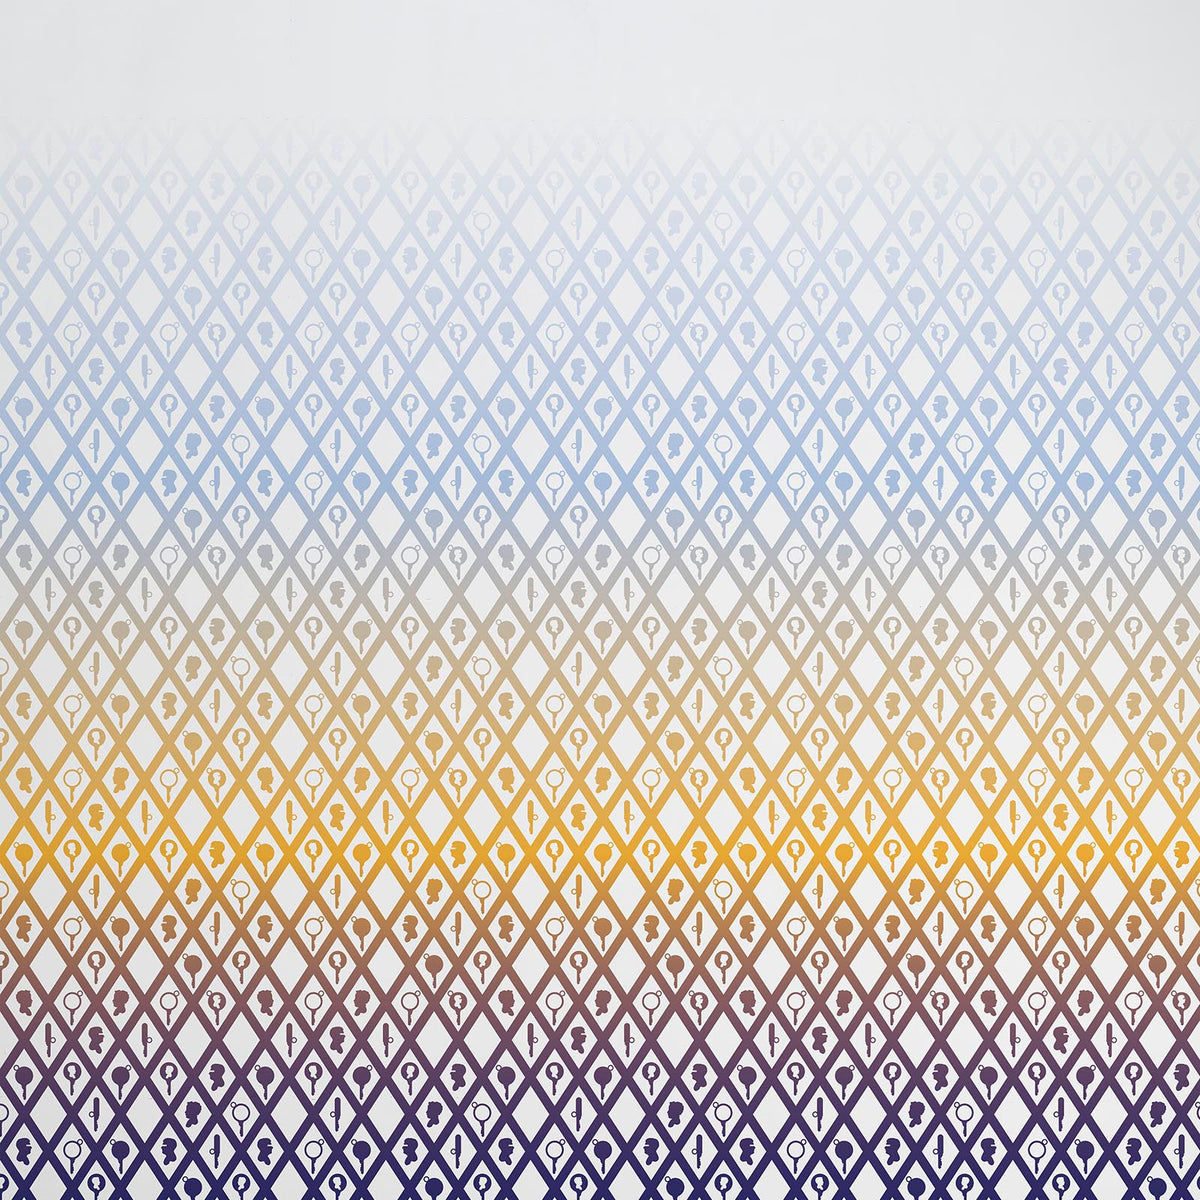 TEU Gradient Wallpaper by Thomas Eurlings for NLXL